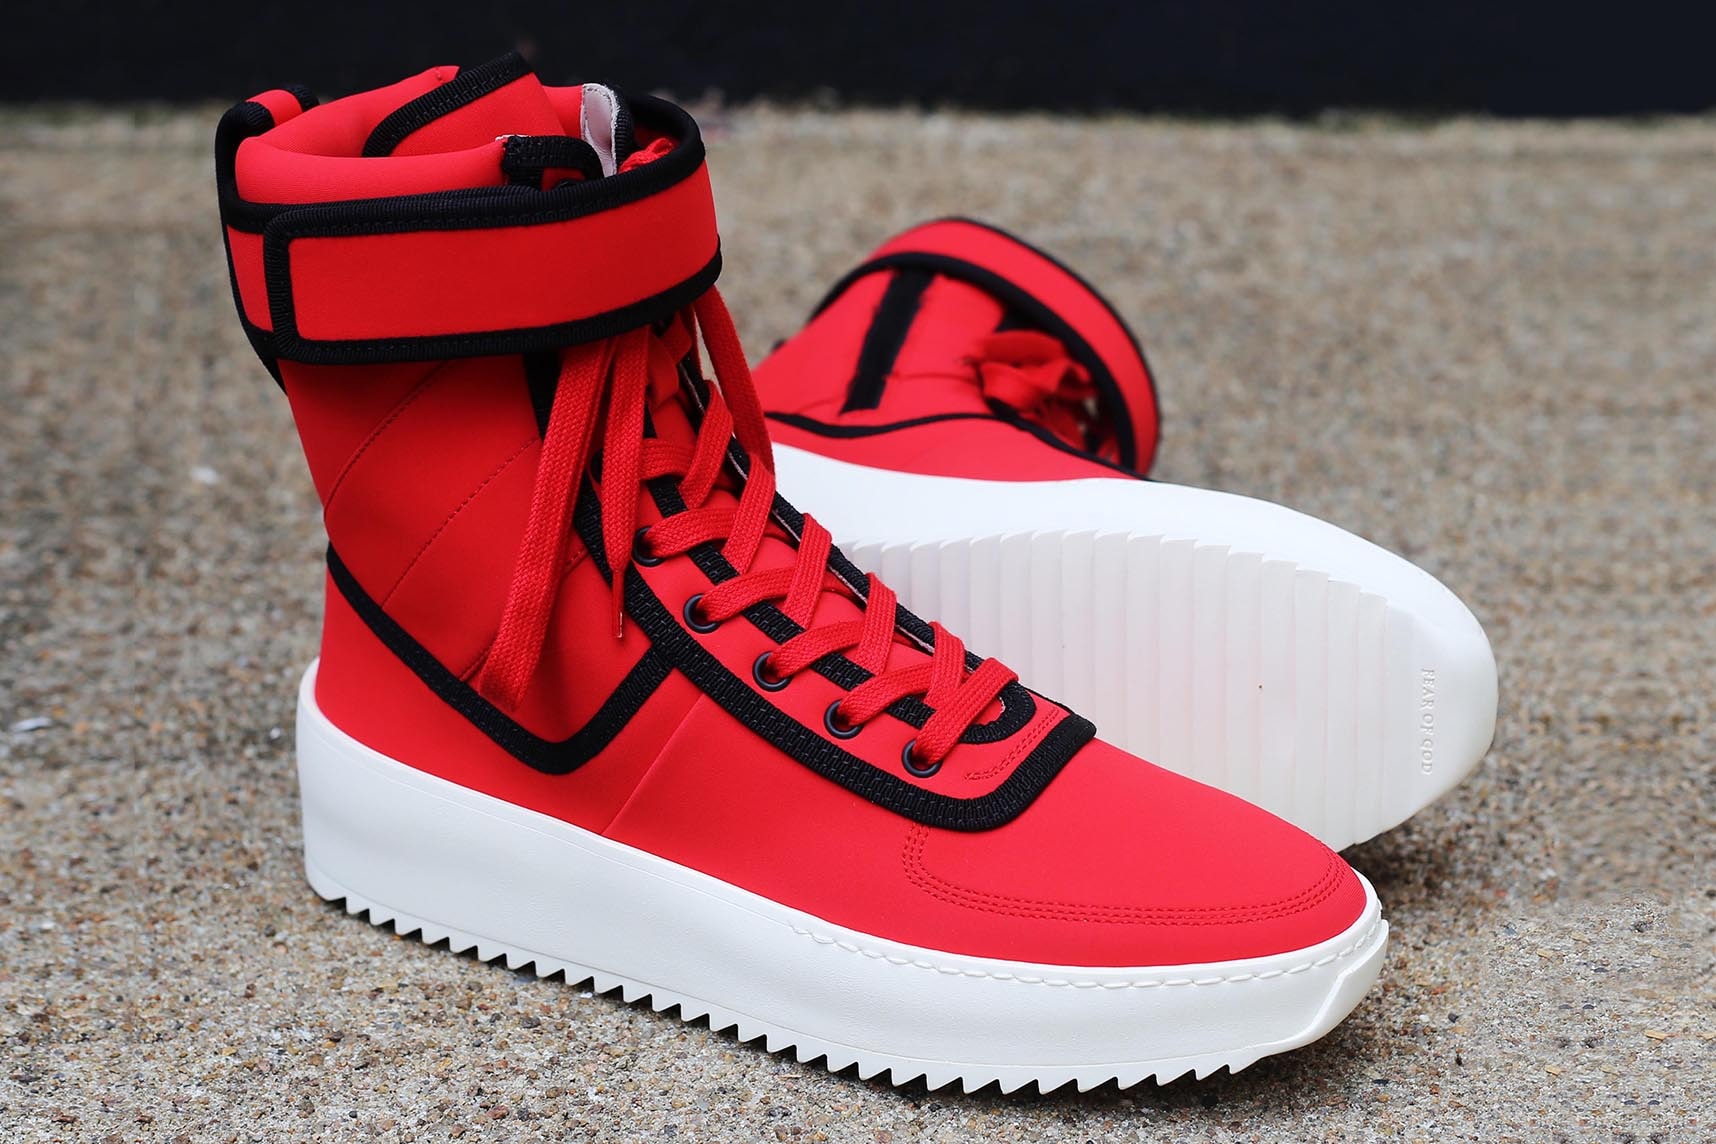 Fear of God Fifth Collection Military Sneaker Infrared Jerry Lorenzo Footwear Sneakers Sneakerboot Shoes